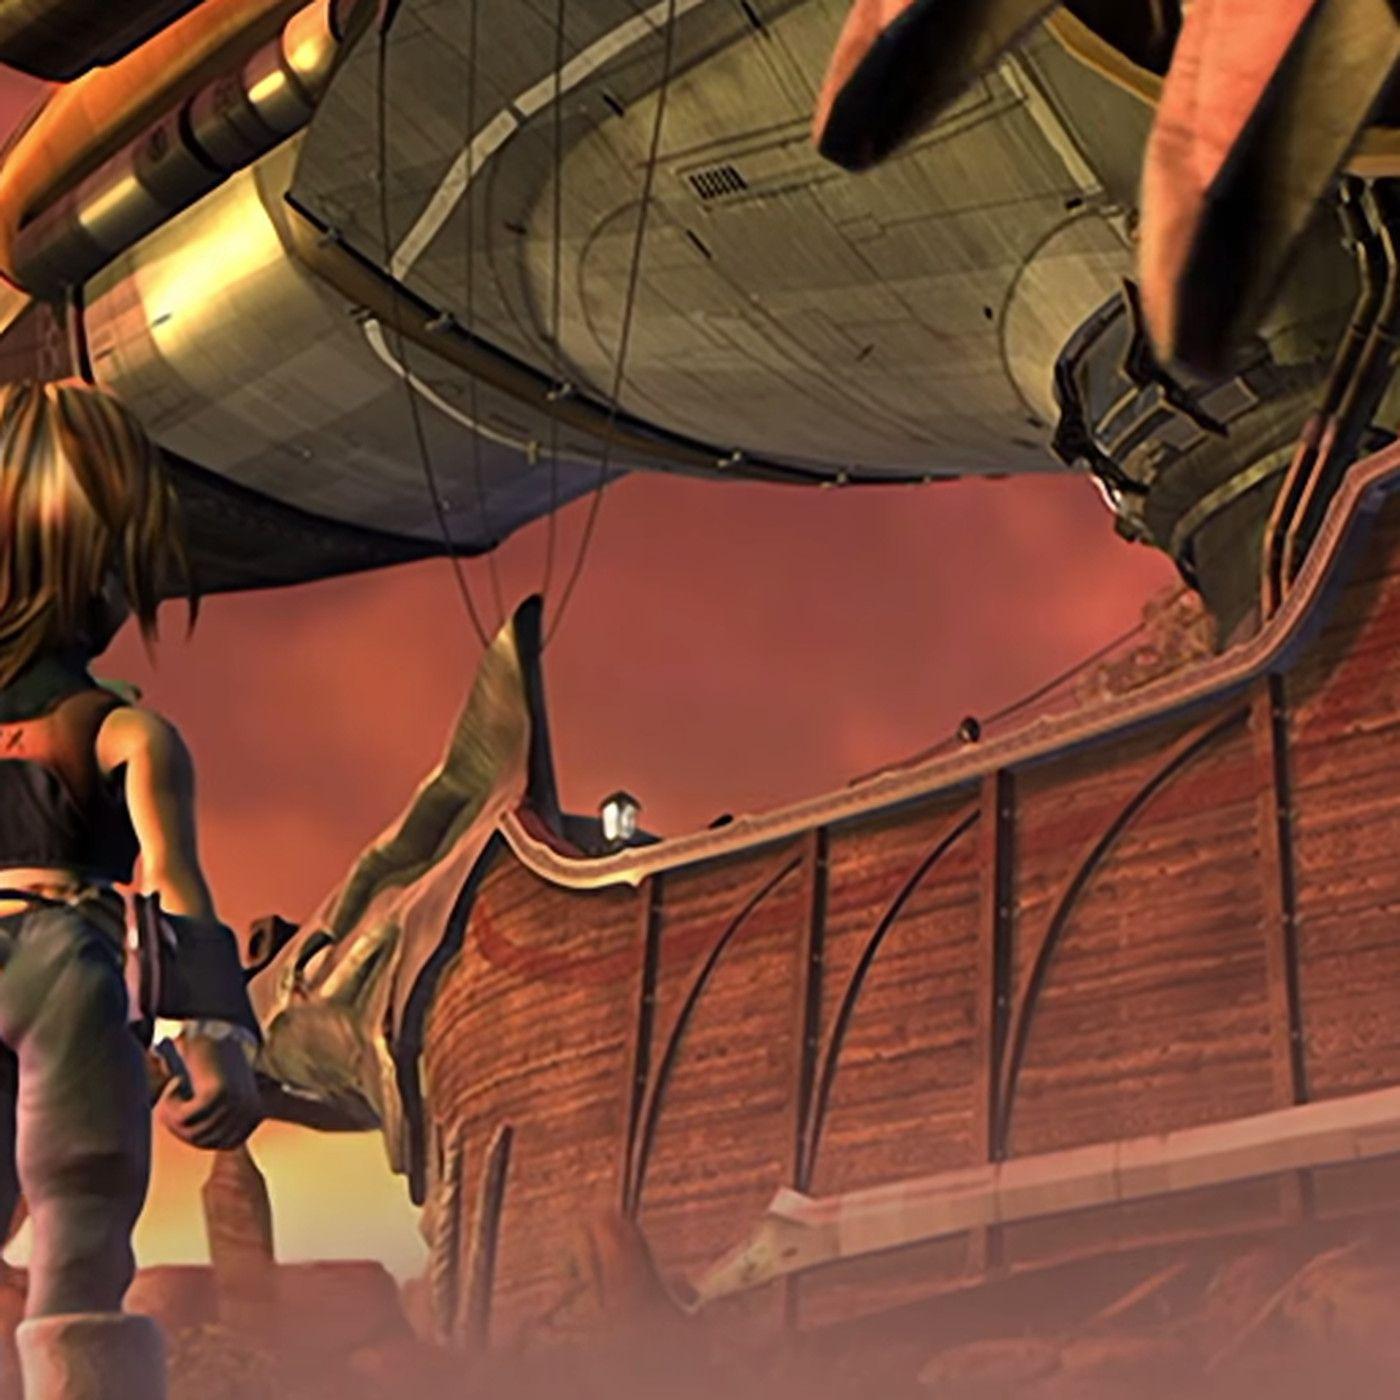 Final Fantasy IX is coming to PC and mobile